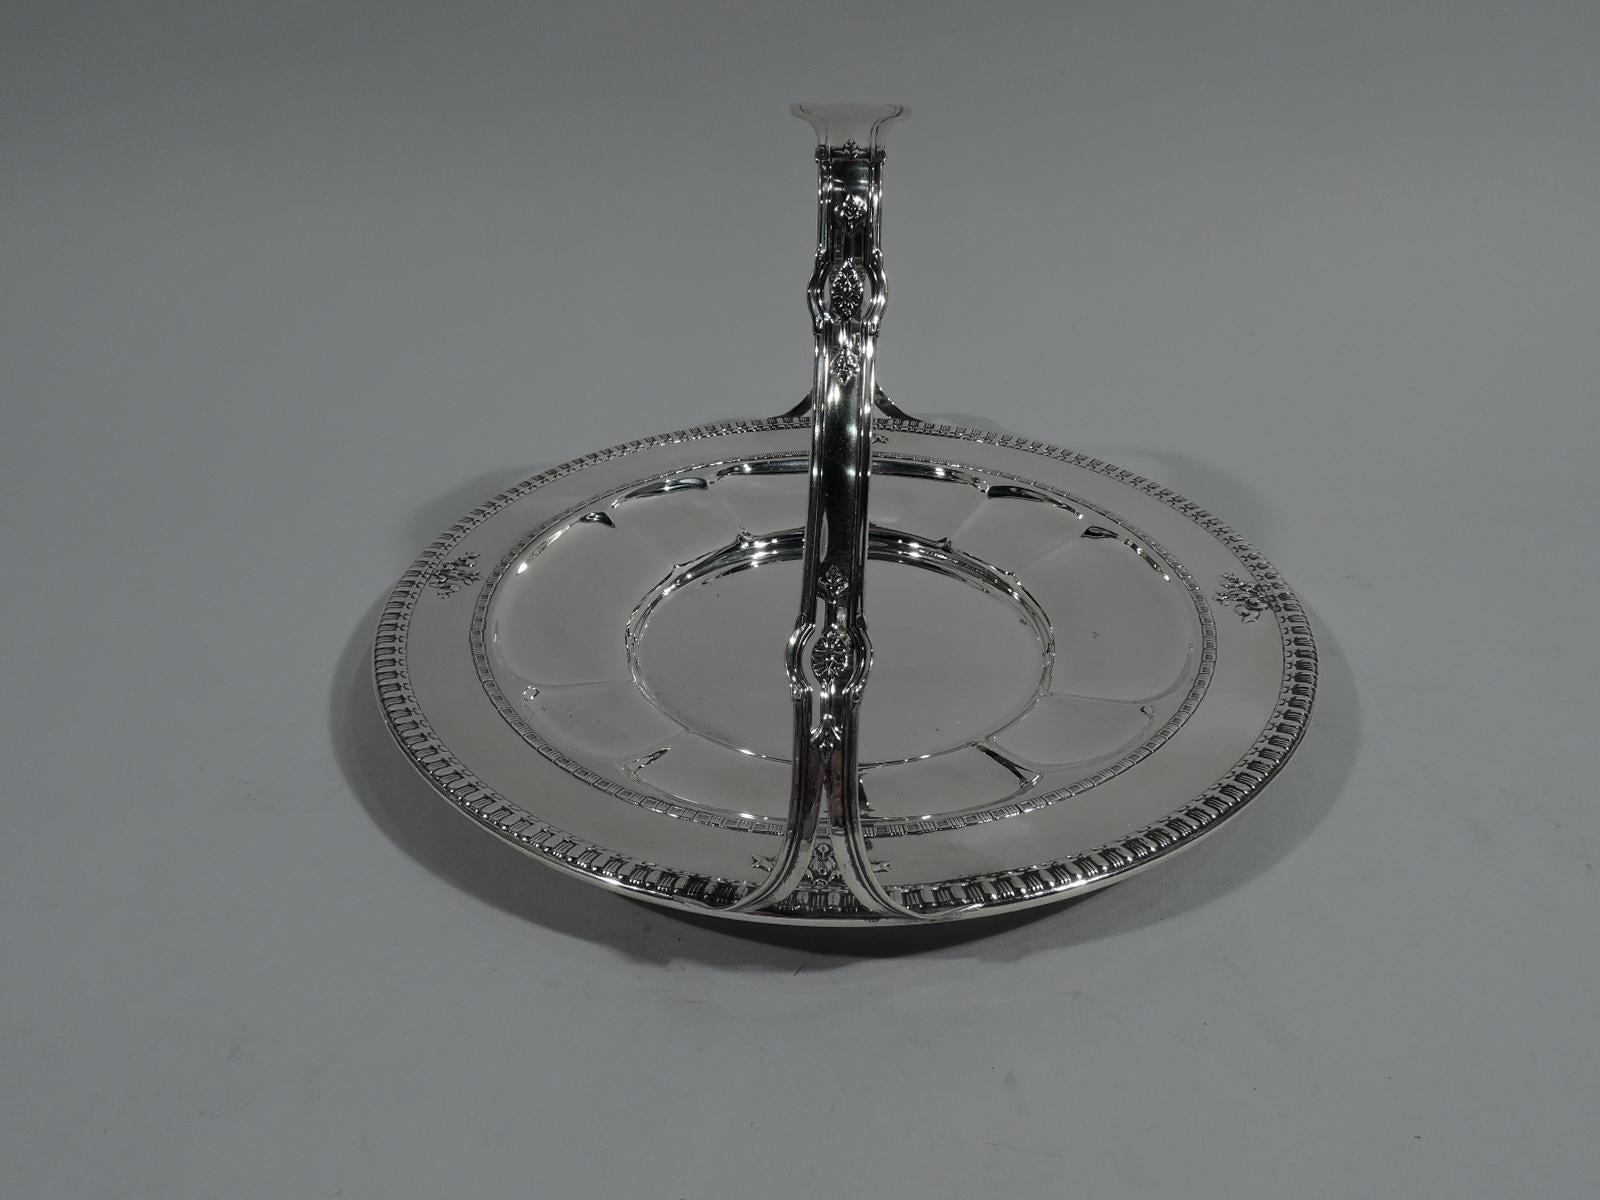 Pretty sterling silver cake plate in Windsor pattern. Made by Dominick & Haff in New York, ca 1915. Circular well. Sides are alternating narrow and wide lobes. Shoulder has chased ribbon-and-flower motif. Bead-and-reel rims. Handle shaped and fixed